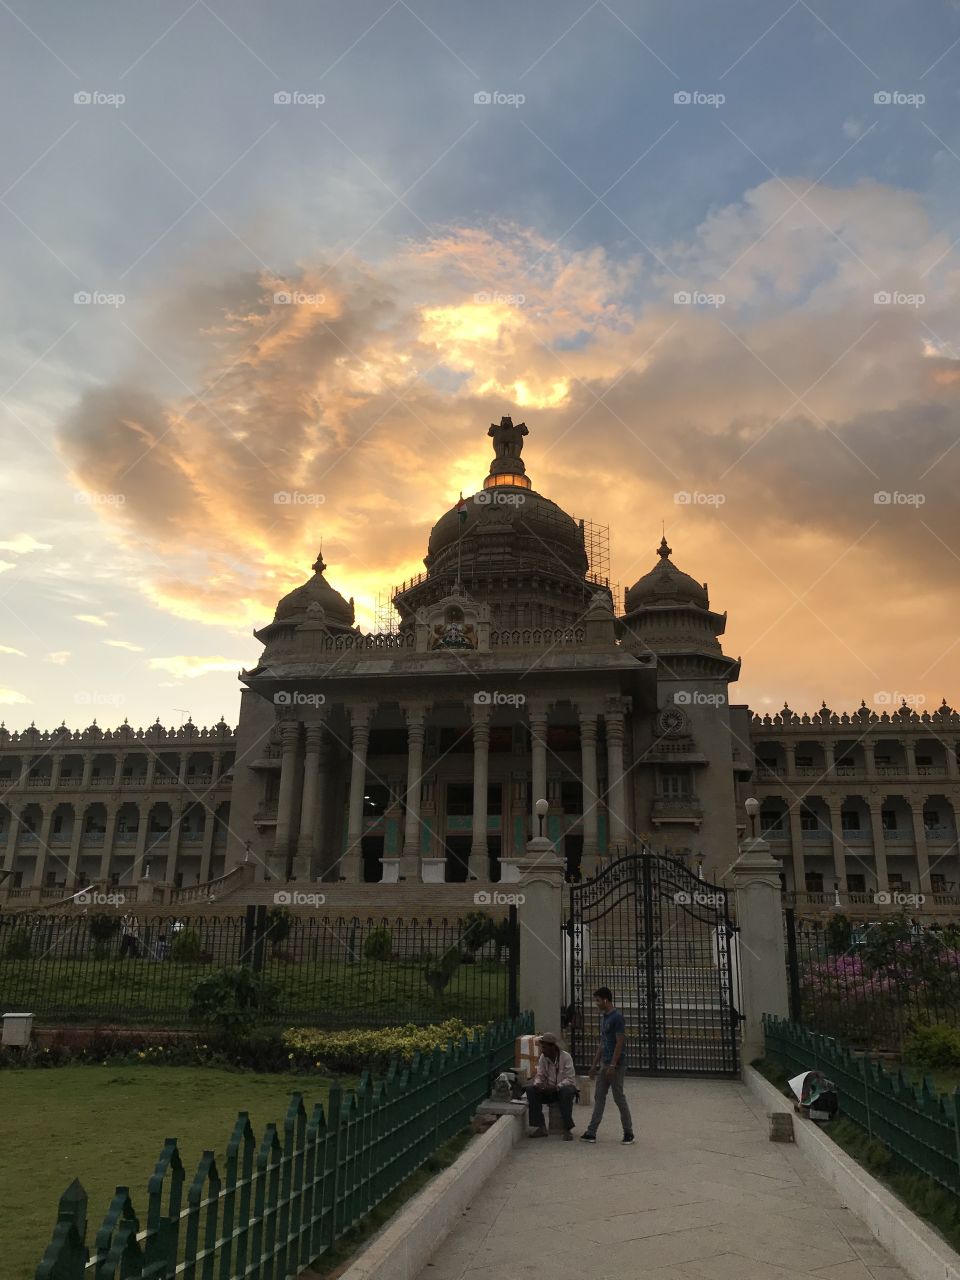 City hall in India 